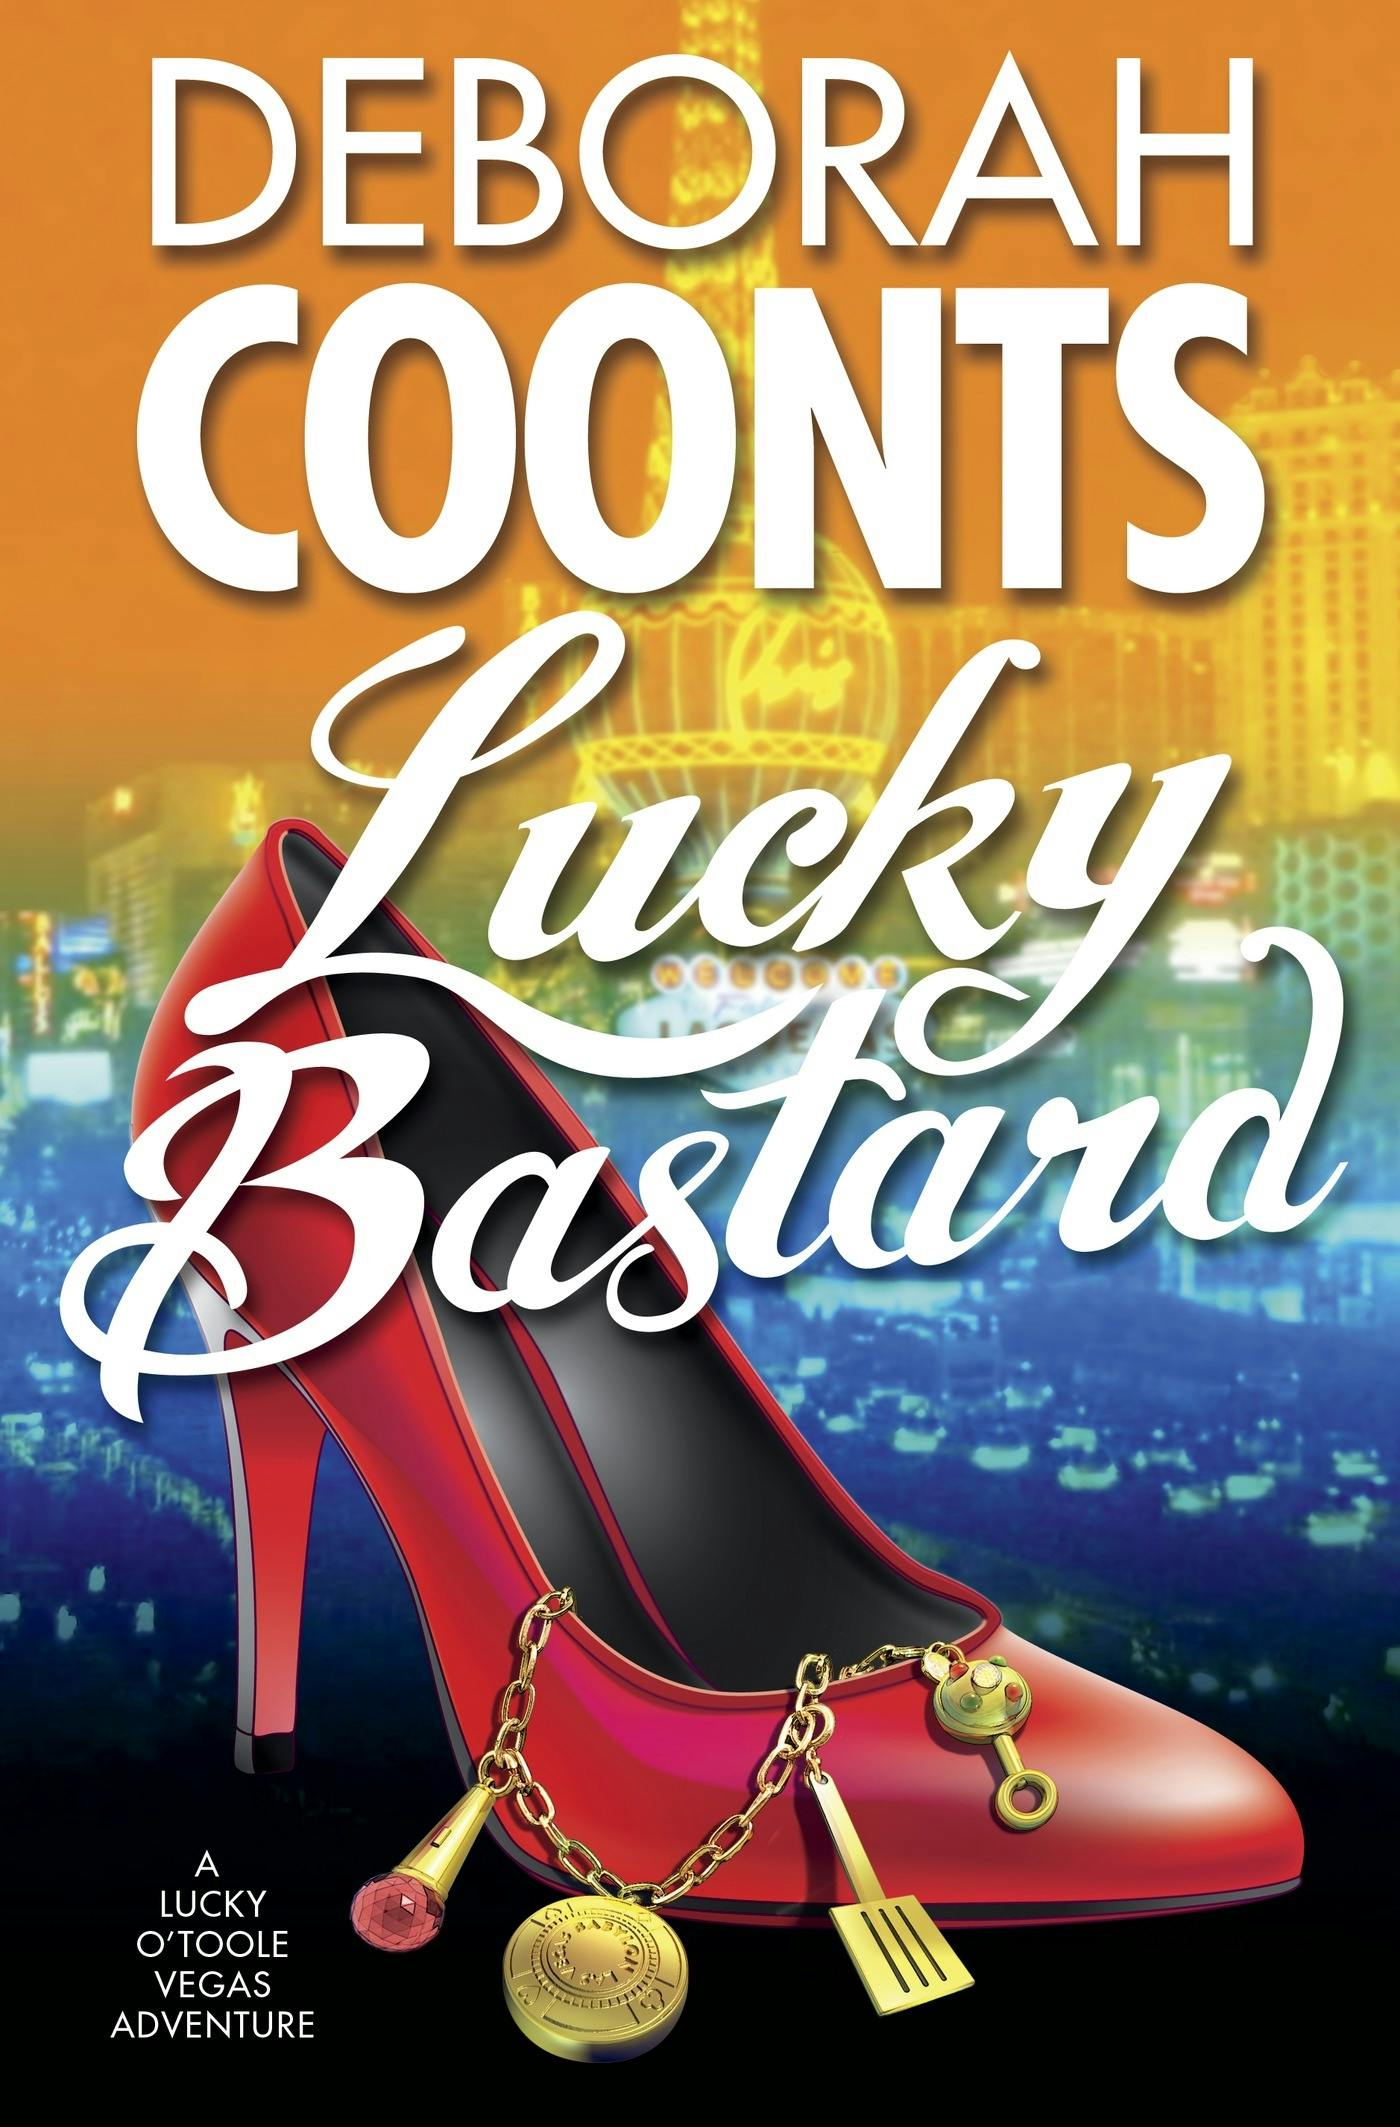 Cover for the book titled as: Lucky Bastard